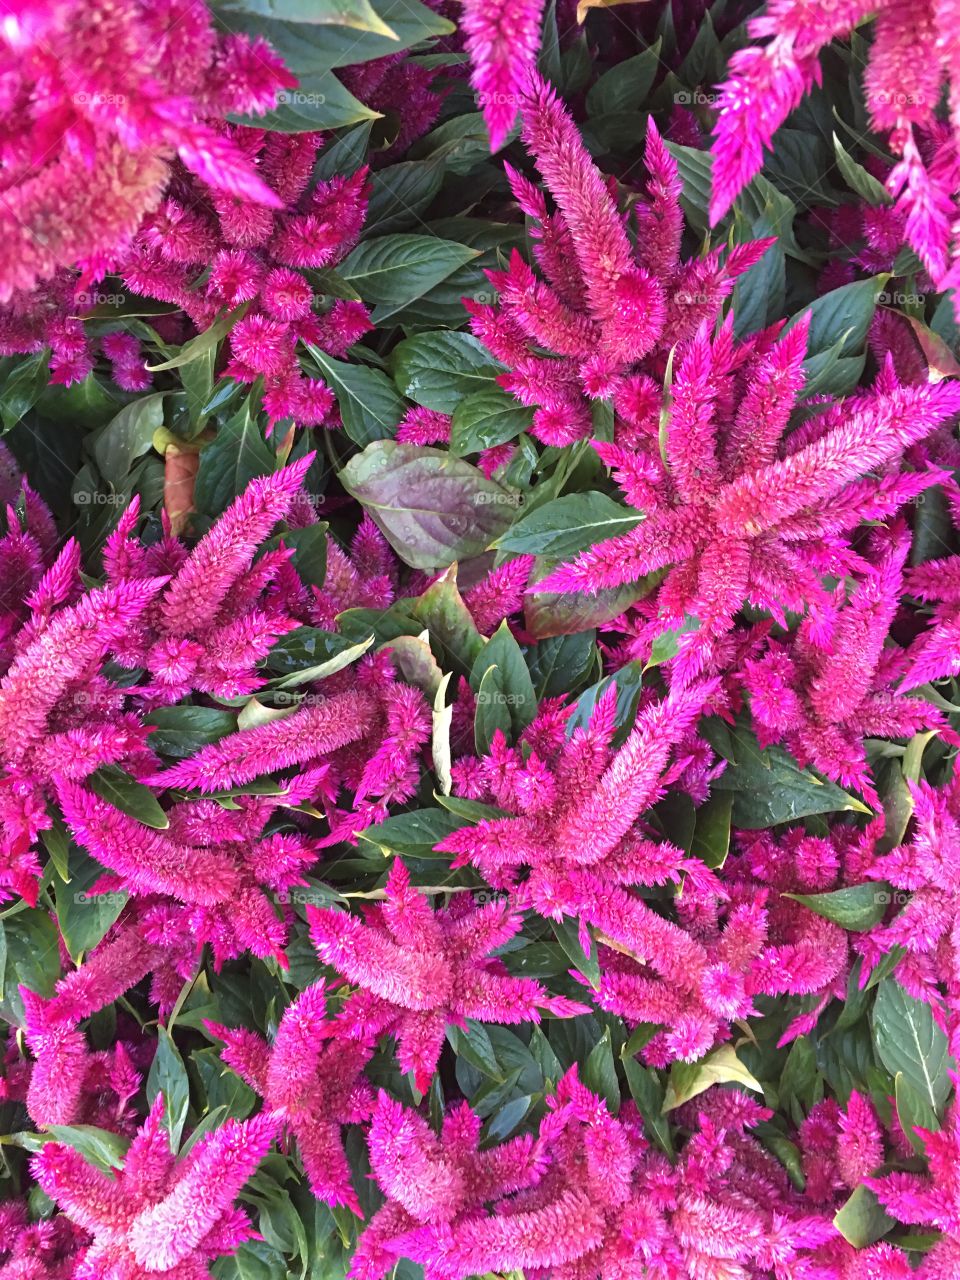 Potted pink flowers surrounded by foliage.